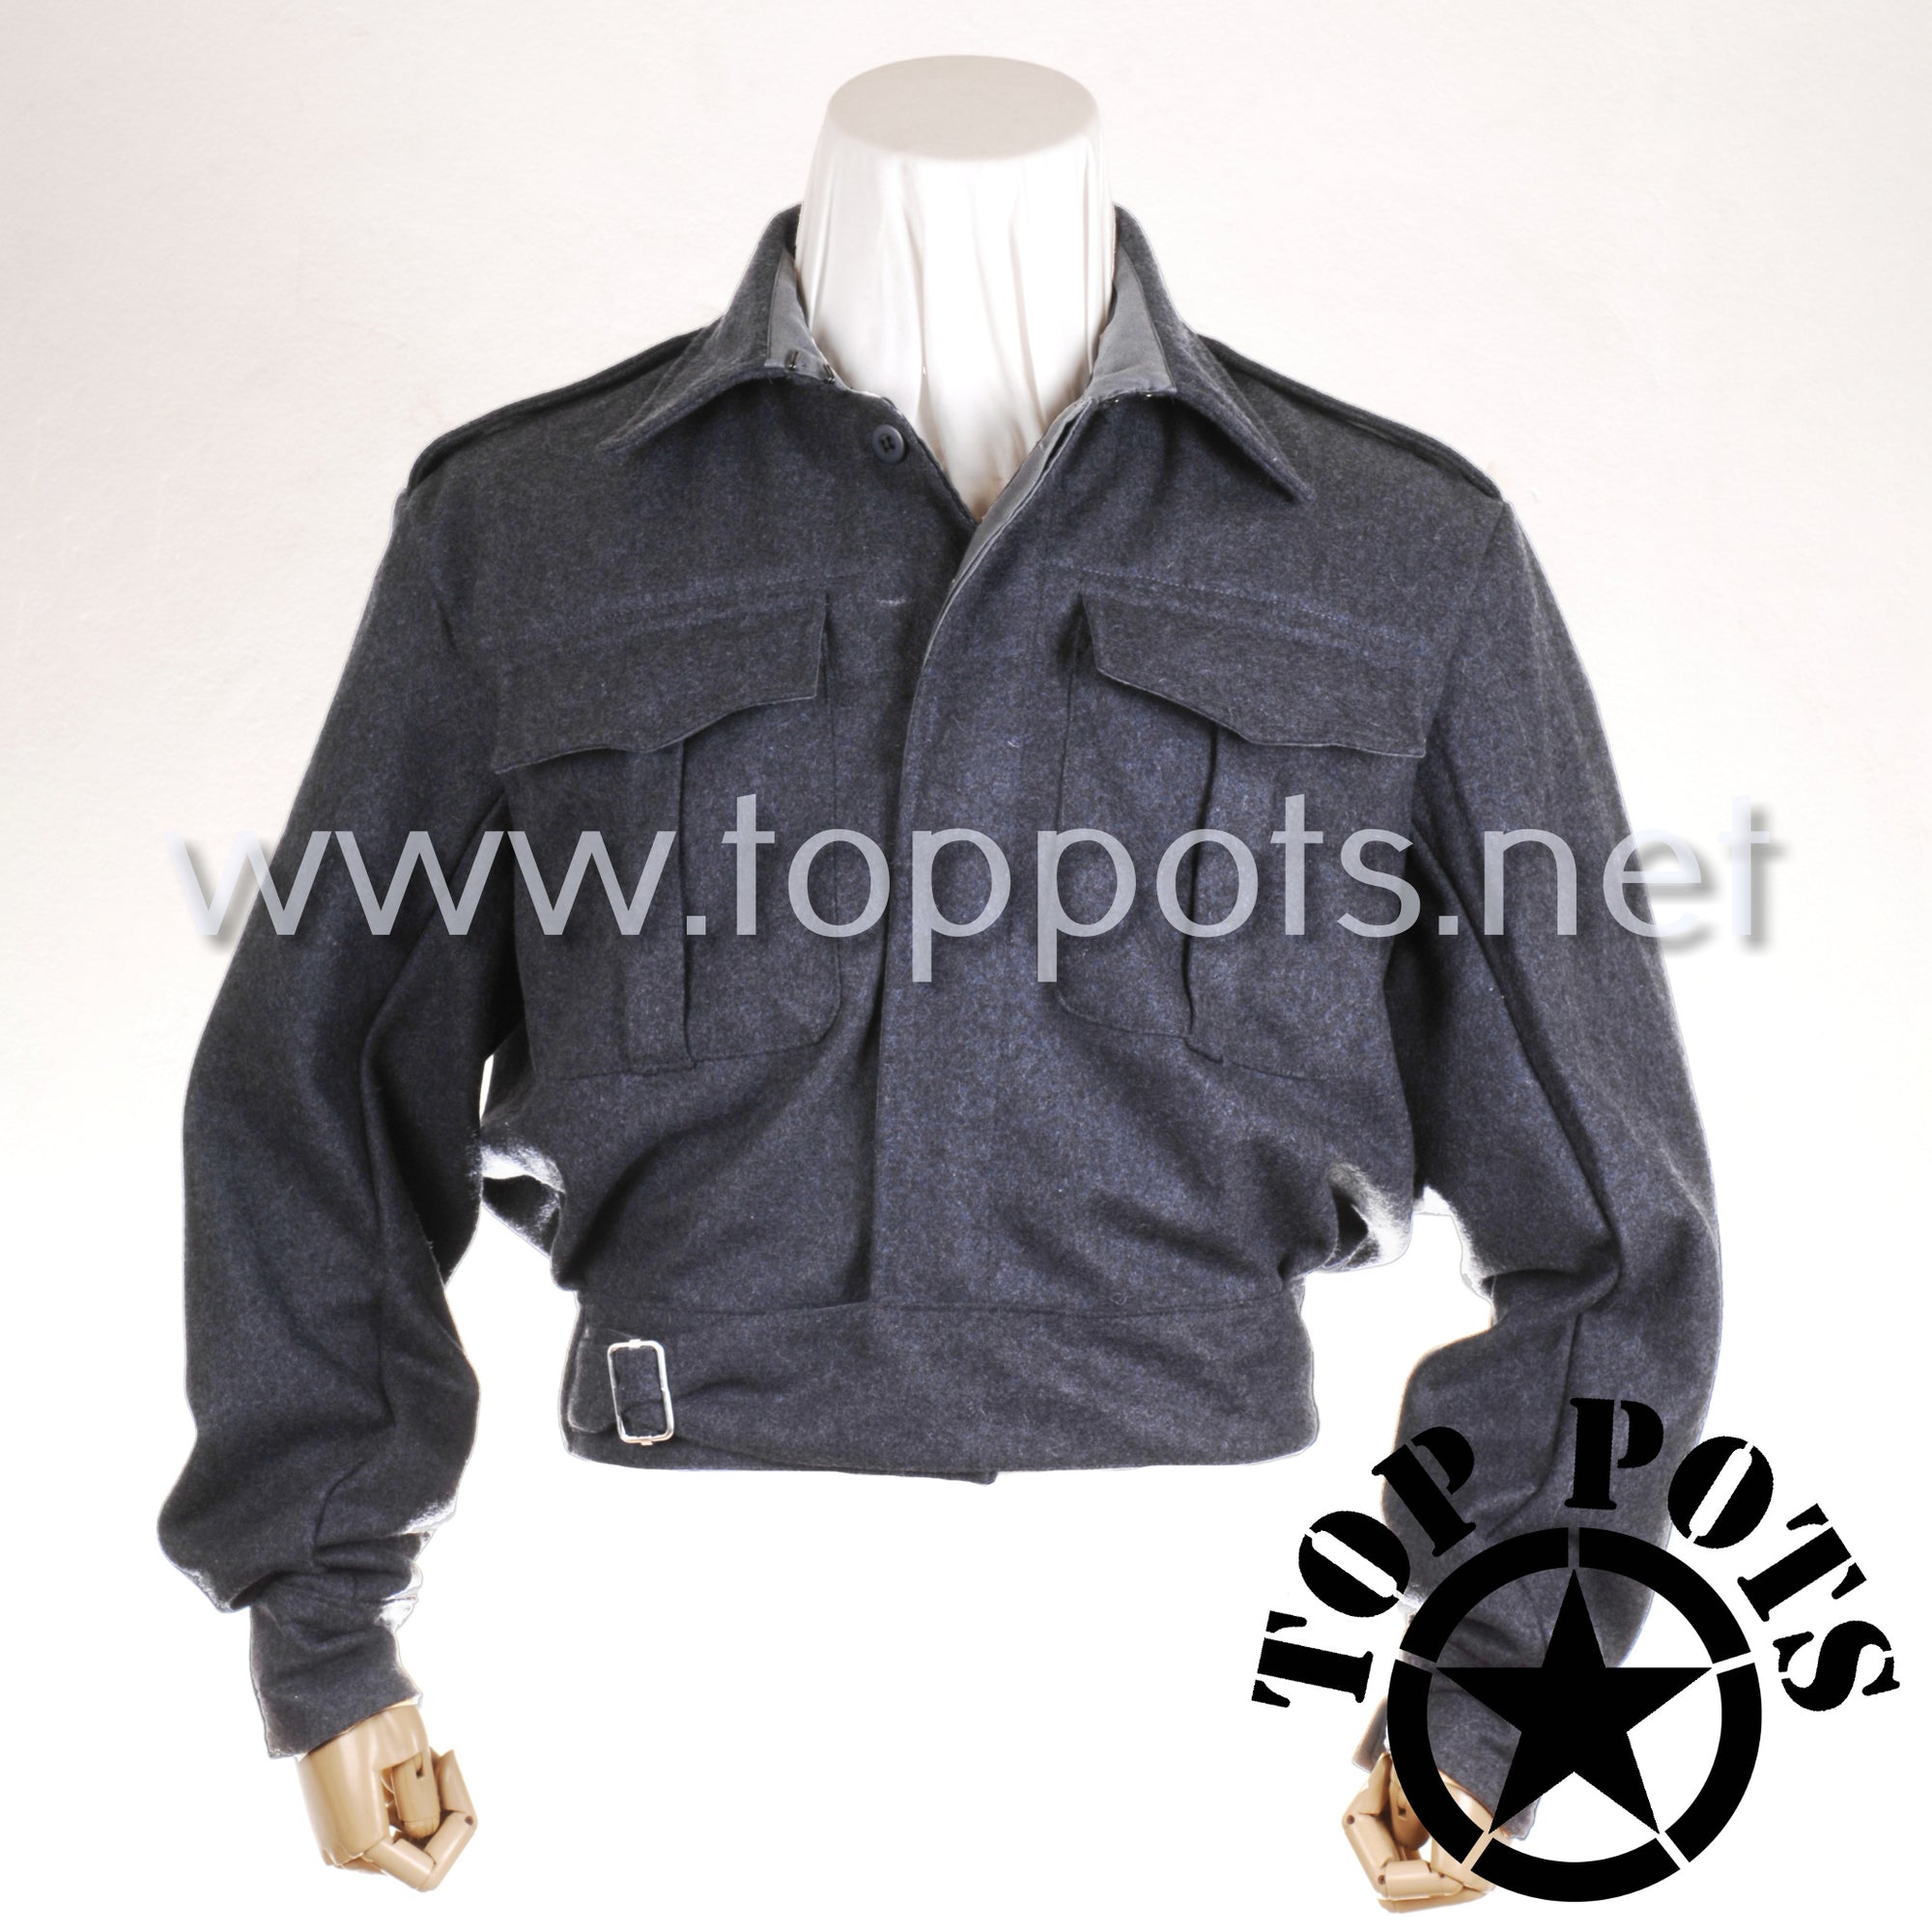 Featured Uniform - Reproduction WWII British RAF P37 Battle Dress Uniform Wool Enlisted Jacket - Blue Grey Wool, No Lining, Light-Weight (Jacket Only)